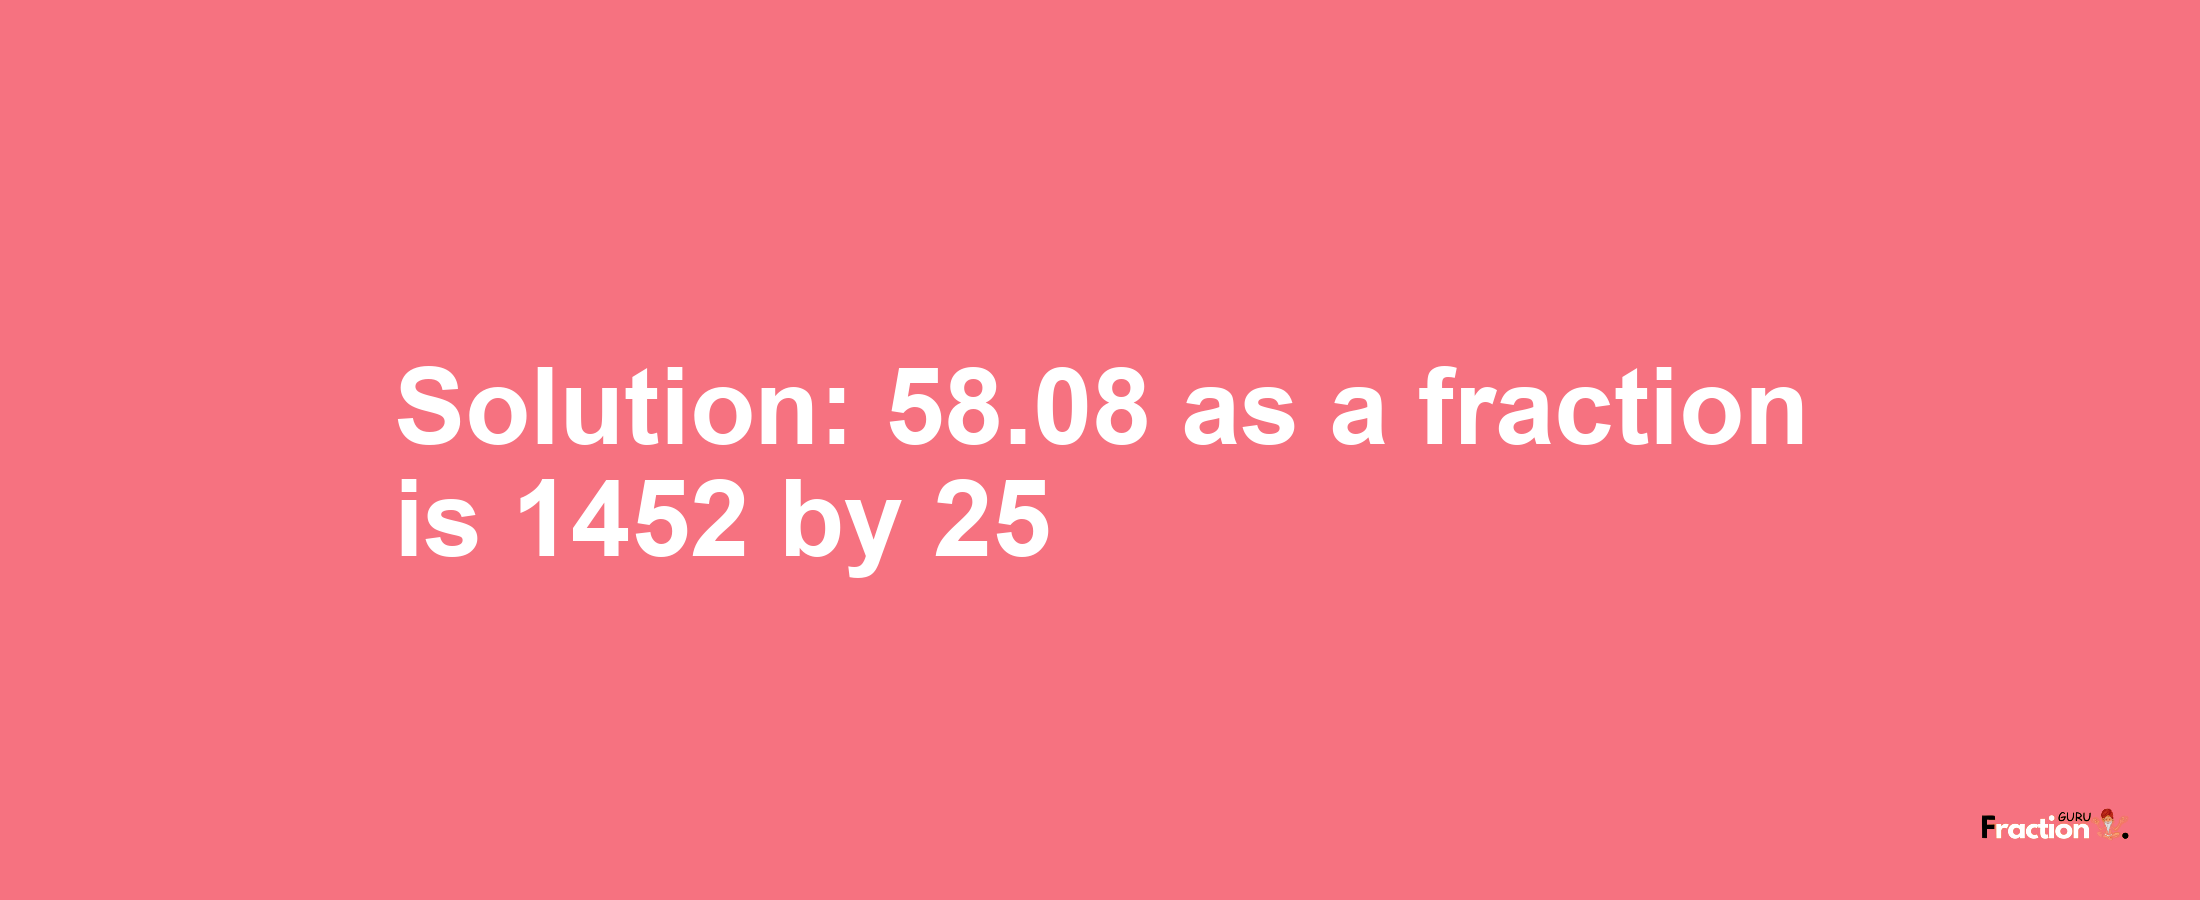 Solution:58.08 as a fraction is 1452/25